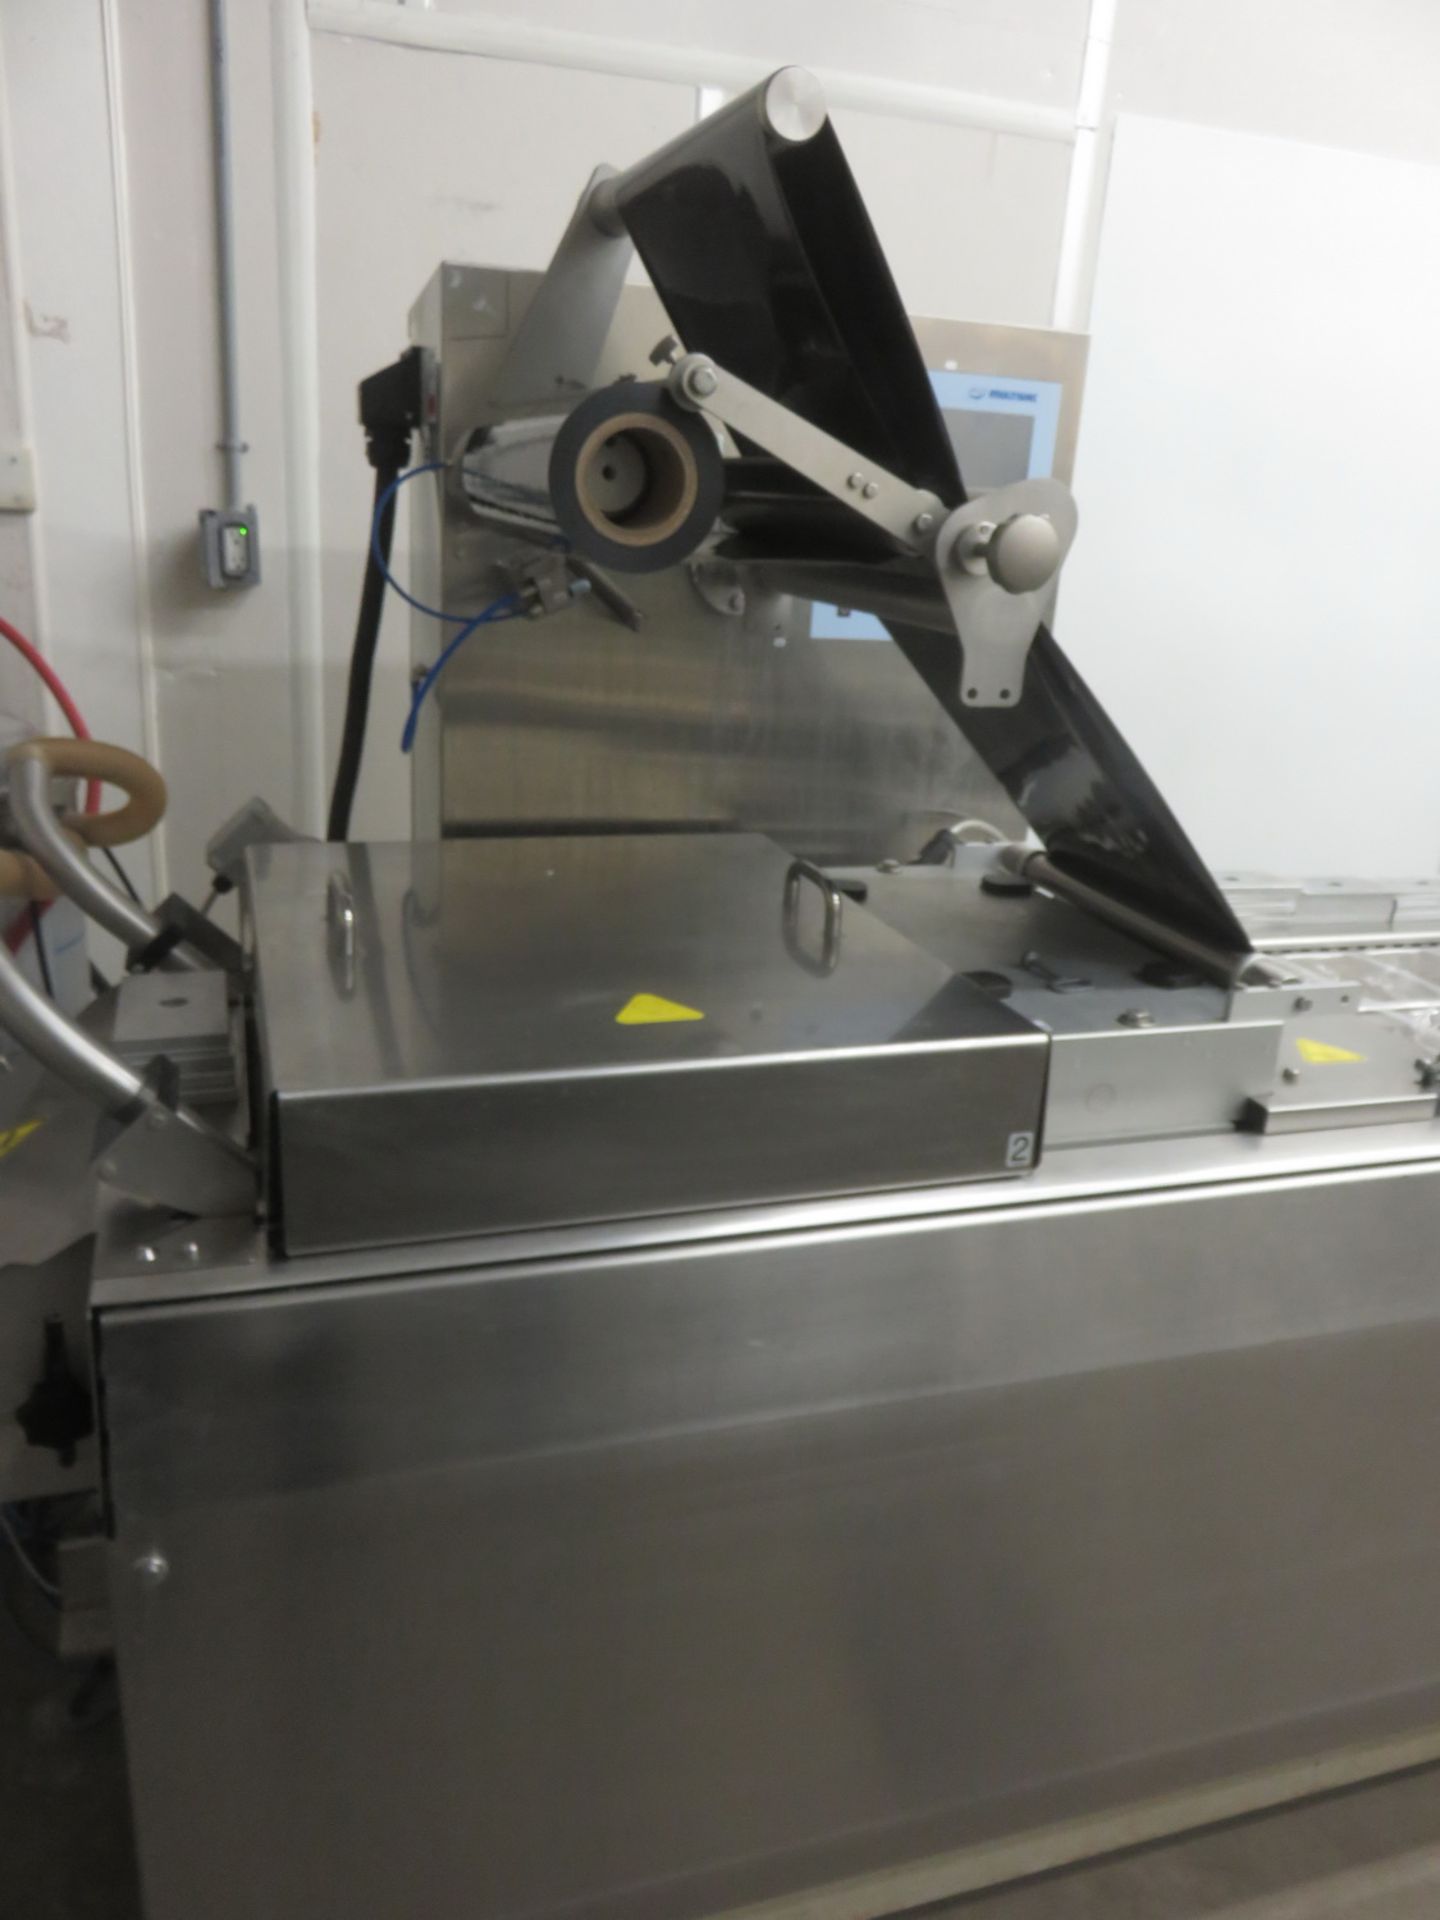 2013 MULTIVAC BASELINE F100 THERMOFORMER PACKAGING MACHINE, C/W TOUCH SCREEN CONTROLS & VACUUM PUMP - Image 6 of 9